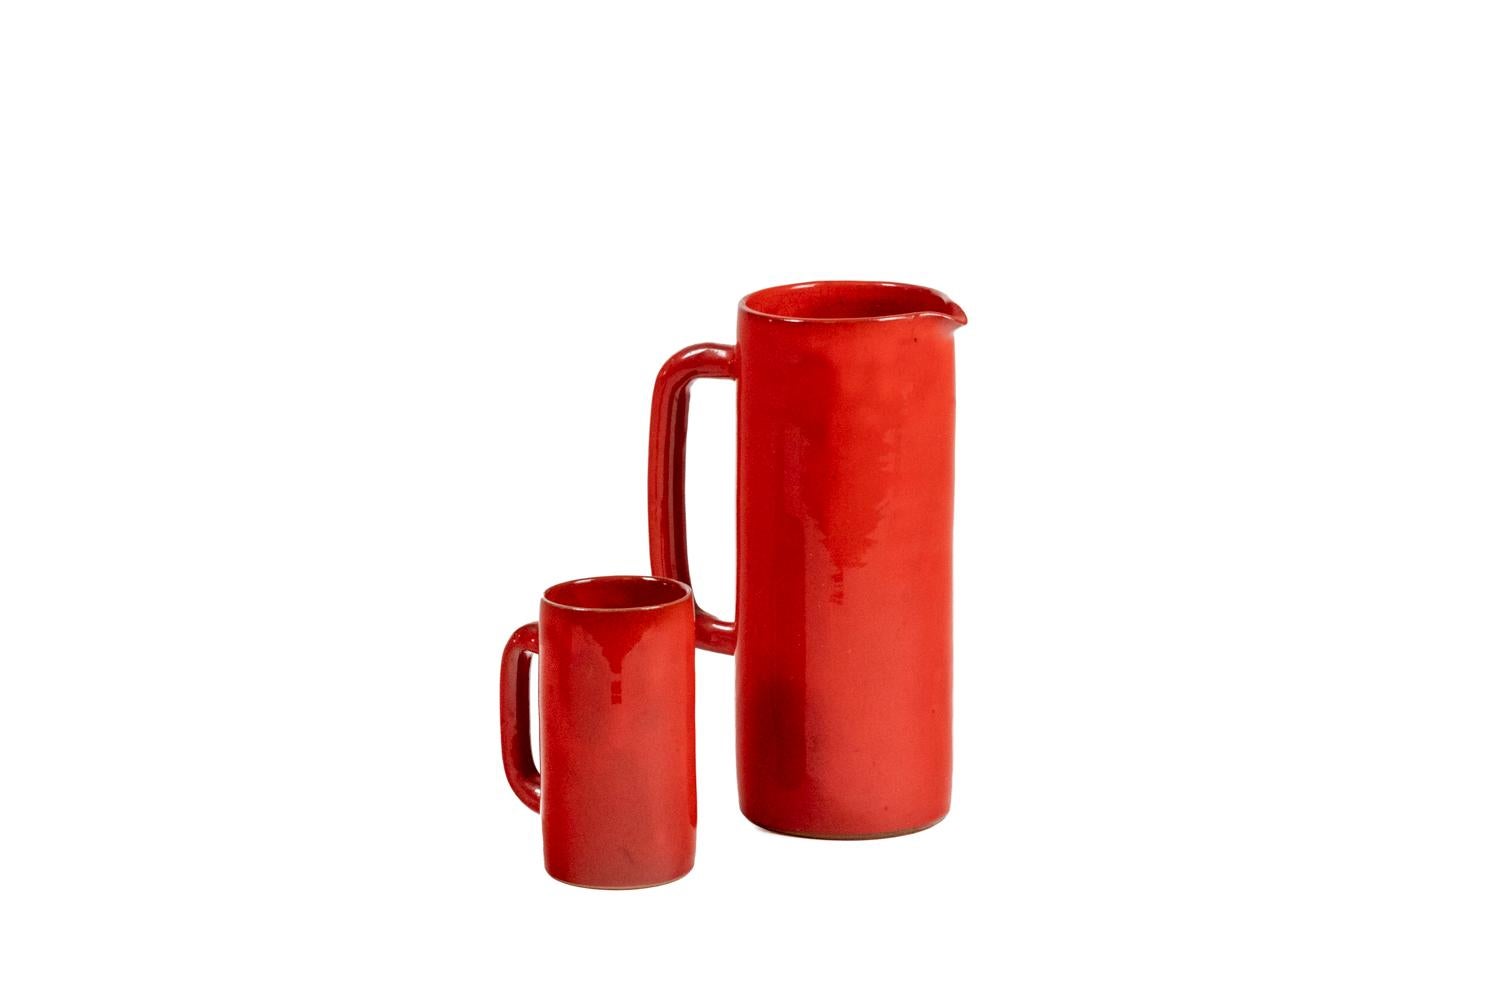 Vallauris, signed.

Ceramic coffee service, enamelled terracotta, red, consisting of a pitcher, two cups and their saucers and a large cup. Signed hollow Vallauris.

French work realized in the 1970s.

Dimensions:

Carafe : H 25 x L 10,5 x P